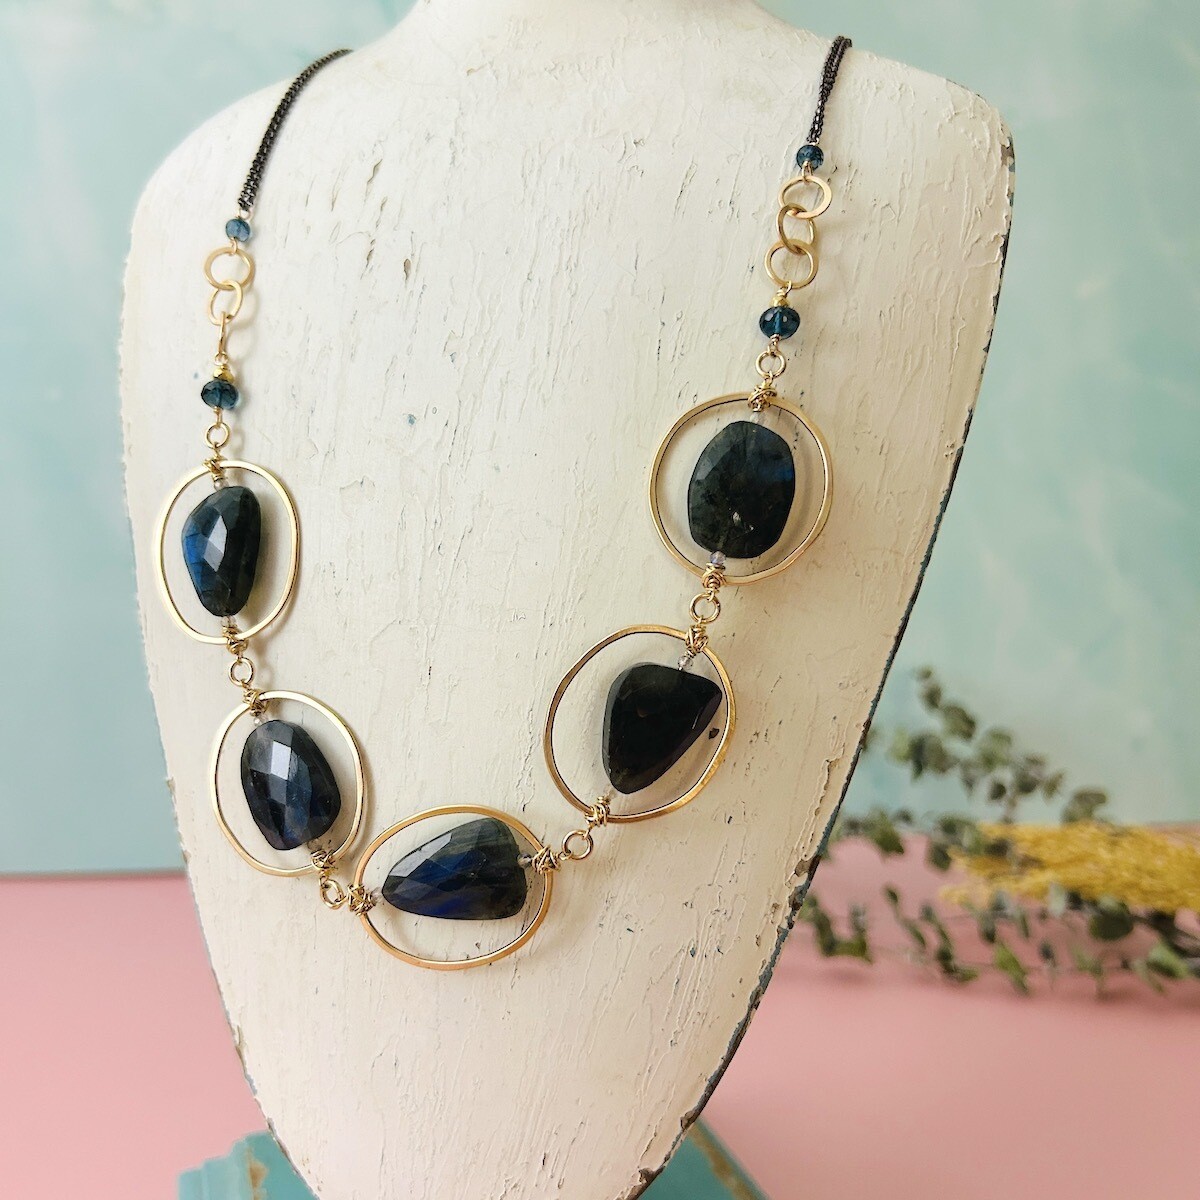 Handmade Labradorite and Blue Topaz Necklace with 14k GF on Sterling Chain